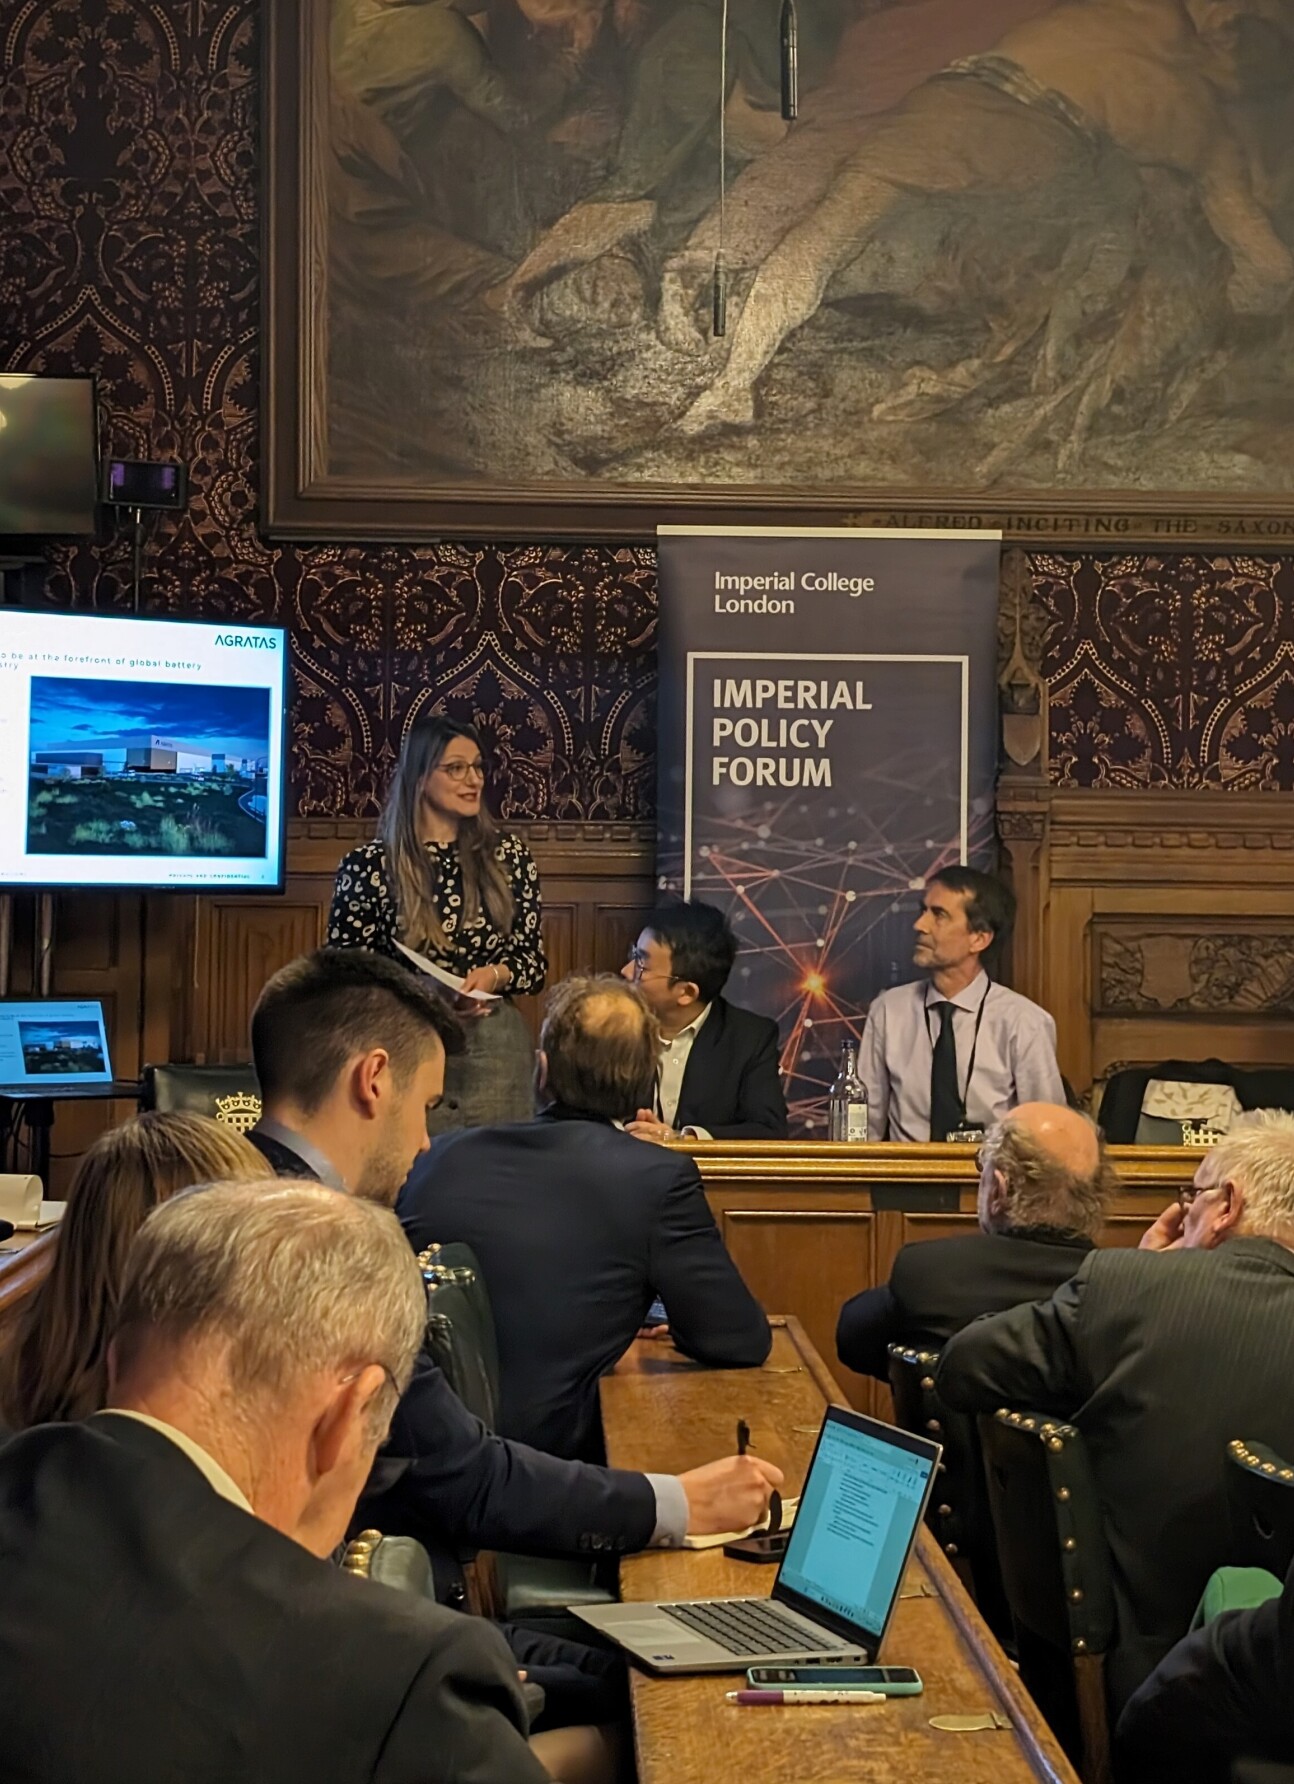 Dr Valentina Gentili delivering her presentation in front of an audience in parliament